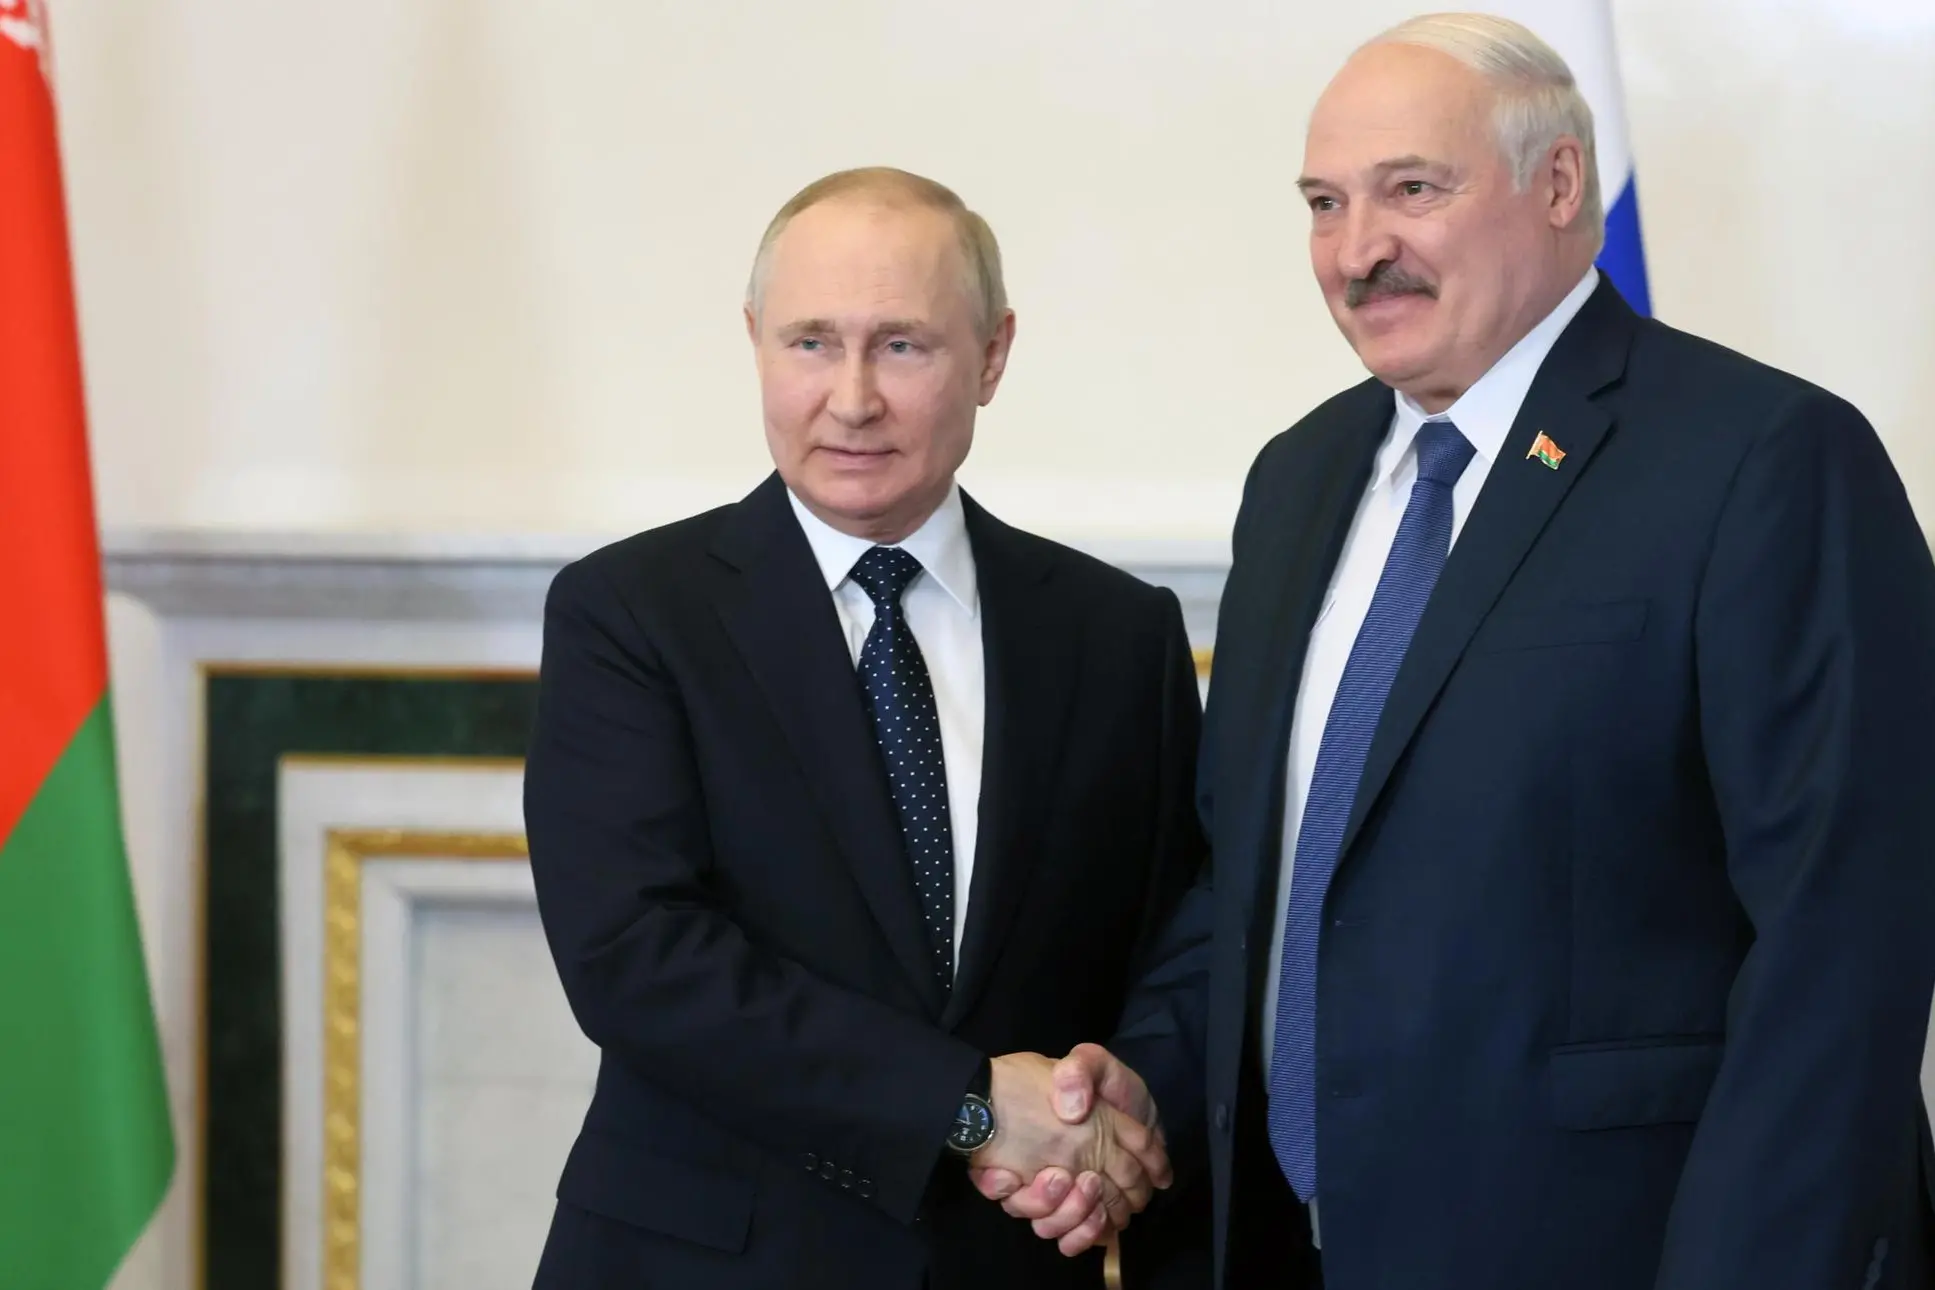 epa10033630 Russian President Vladimir Putin (L) shakes hands with Belarusian President Alexander Lukashenko during their meeting in the Konstantinovsky Palace in St.Petersburg, Russia, 25 June 2022. The meeting is taking place on the day of the 30th anniversary of the establishment of diplomatic relations between the two countries. During the conversation, Alexander Lukashenko asked Vladimir Putin to help adapt Belarusian aircraft to be equipped with nuclear warheads. Vladimir Putin said that Russia would hand over the Iskander-M complexes to Minsk in the coming months. EPA/MIKHAIL METZEL / KREMLIN / POOL MANDATORY CREDIT